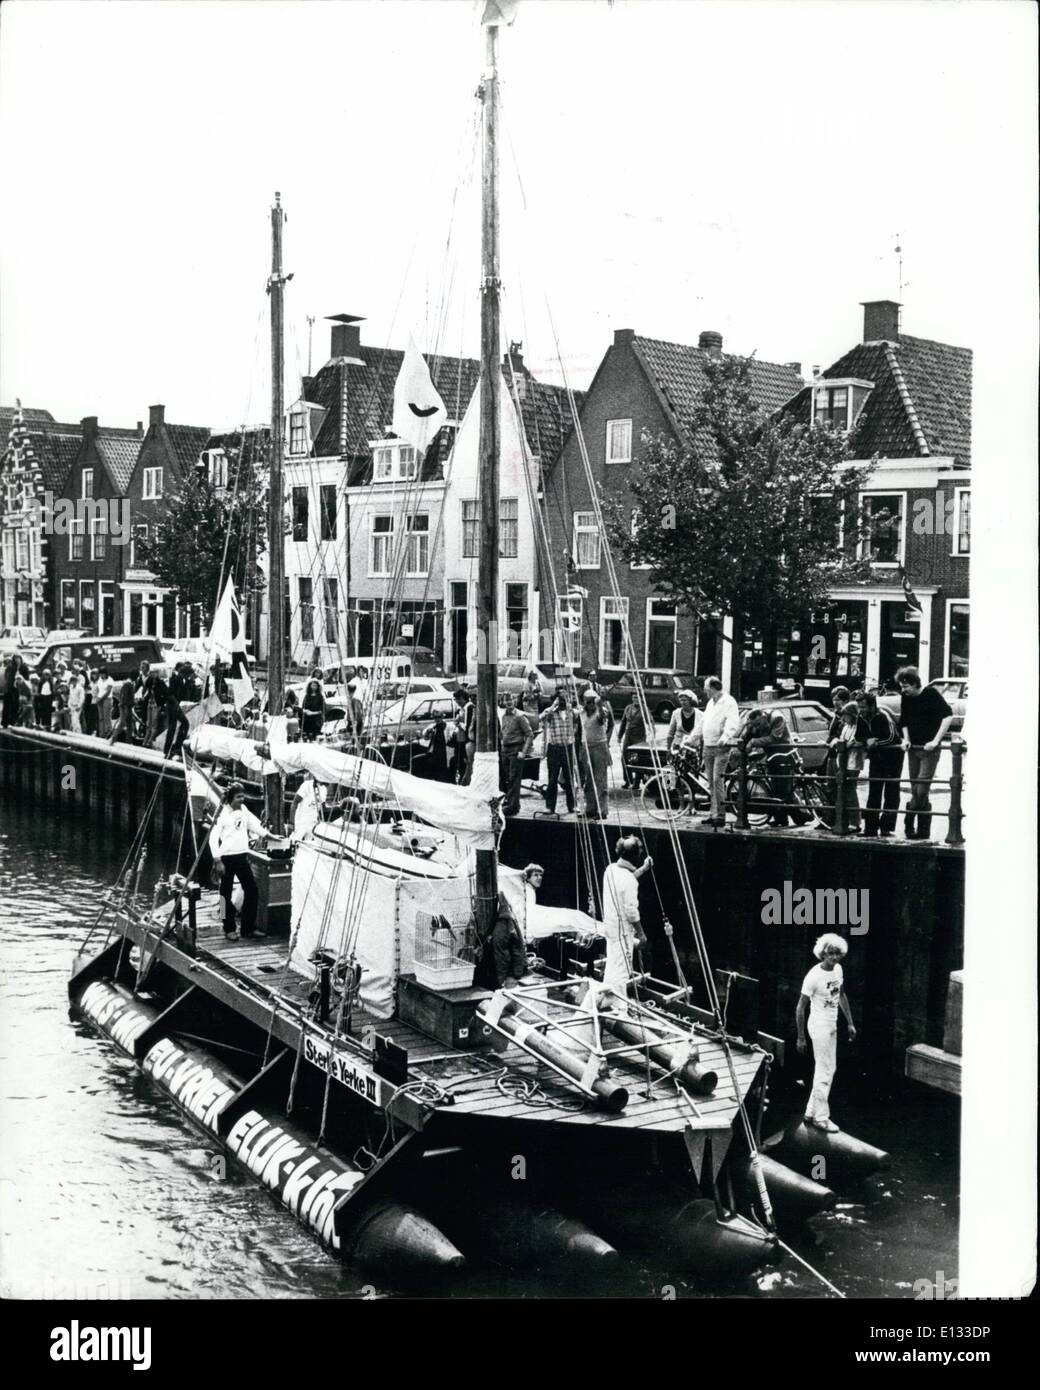 Feb. 26, 2012 - Self-made Raft To Cross The Atlantic: The self-made raft called ''Sterke Yerke Ill'' maned by four Dutch Students leaving the dockside at Den Helder at the start of their 5000 mile journey across the Atlantic. Stock Photo